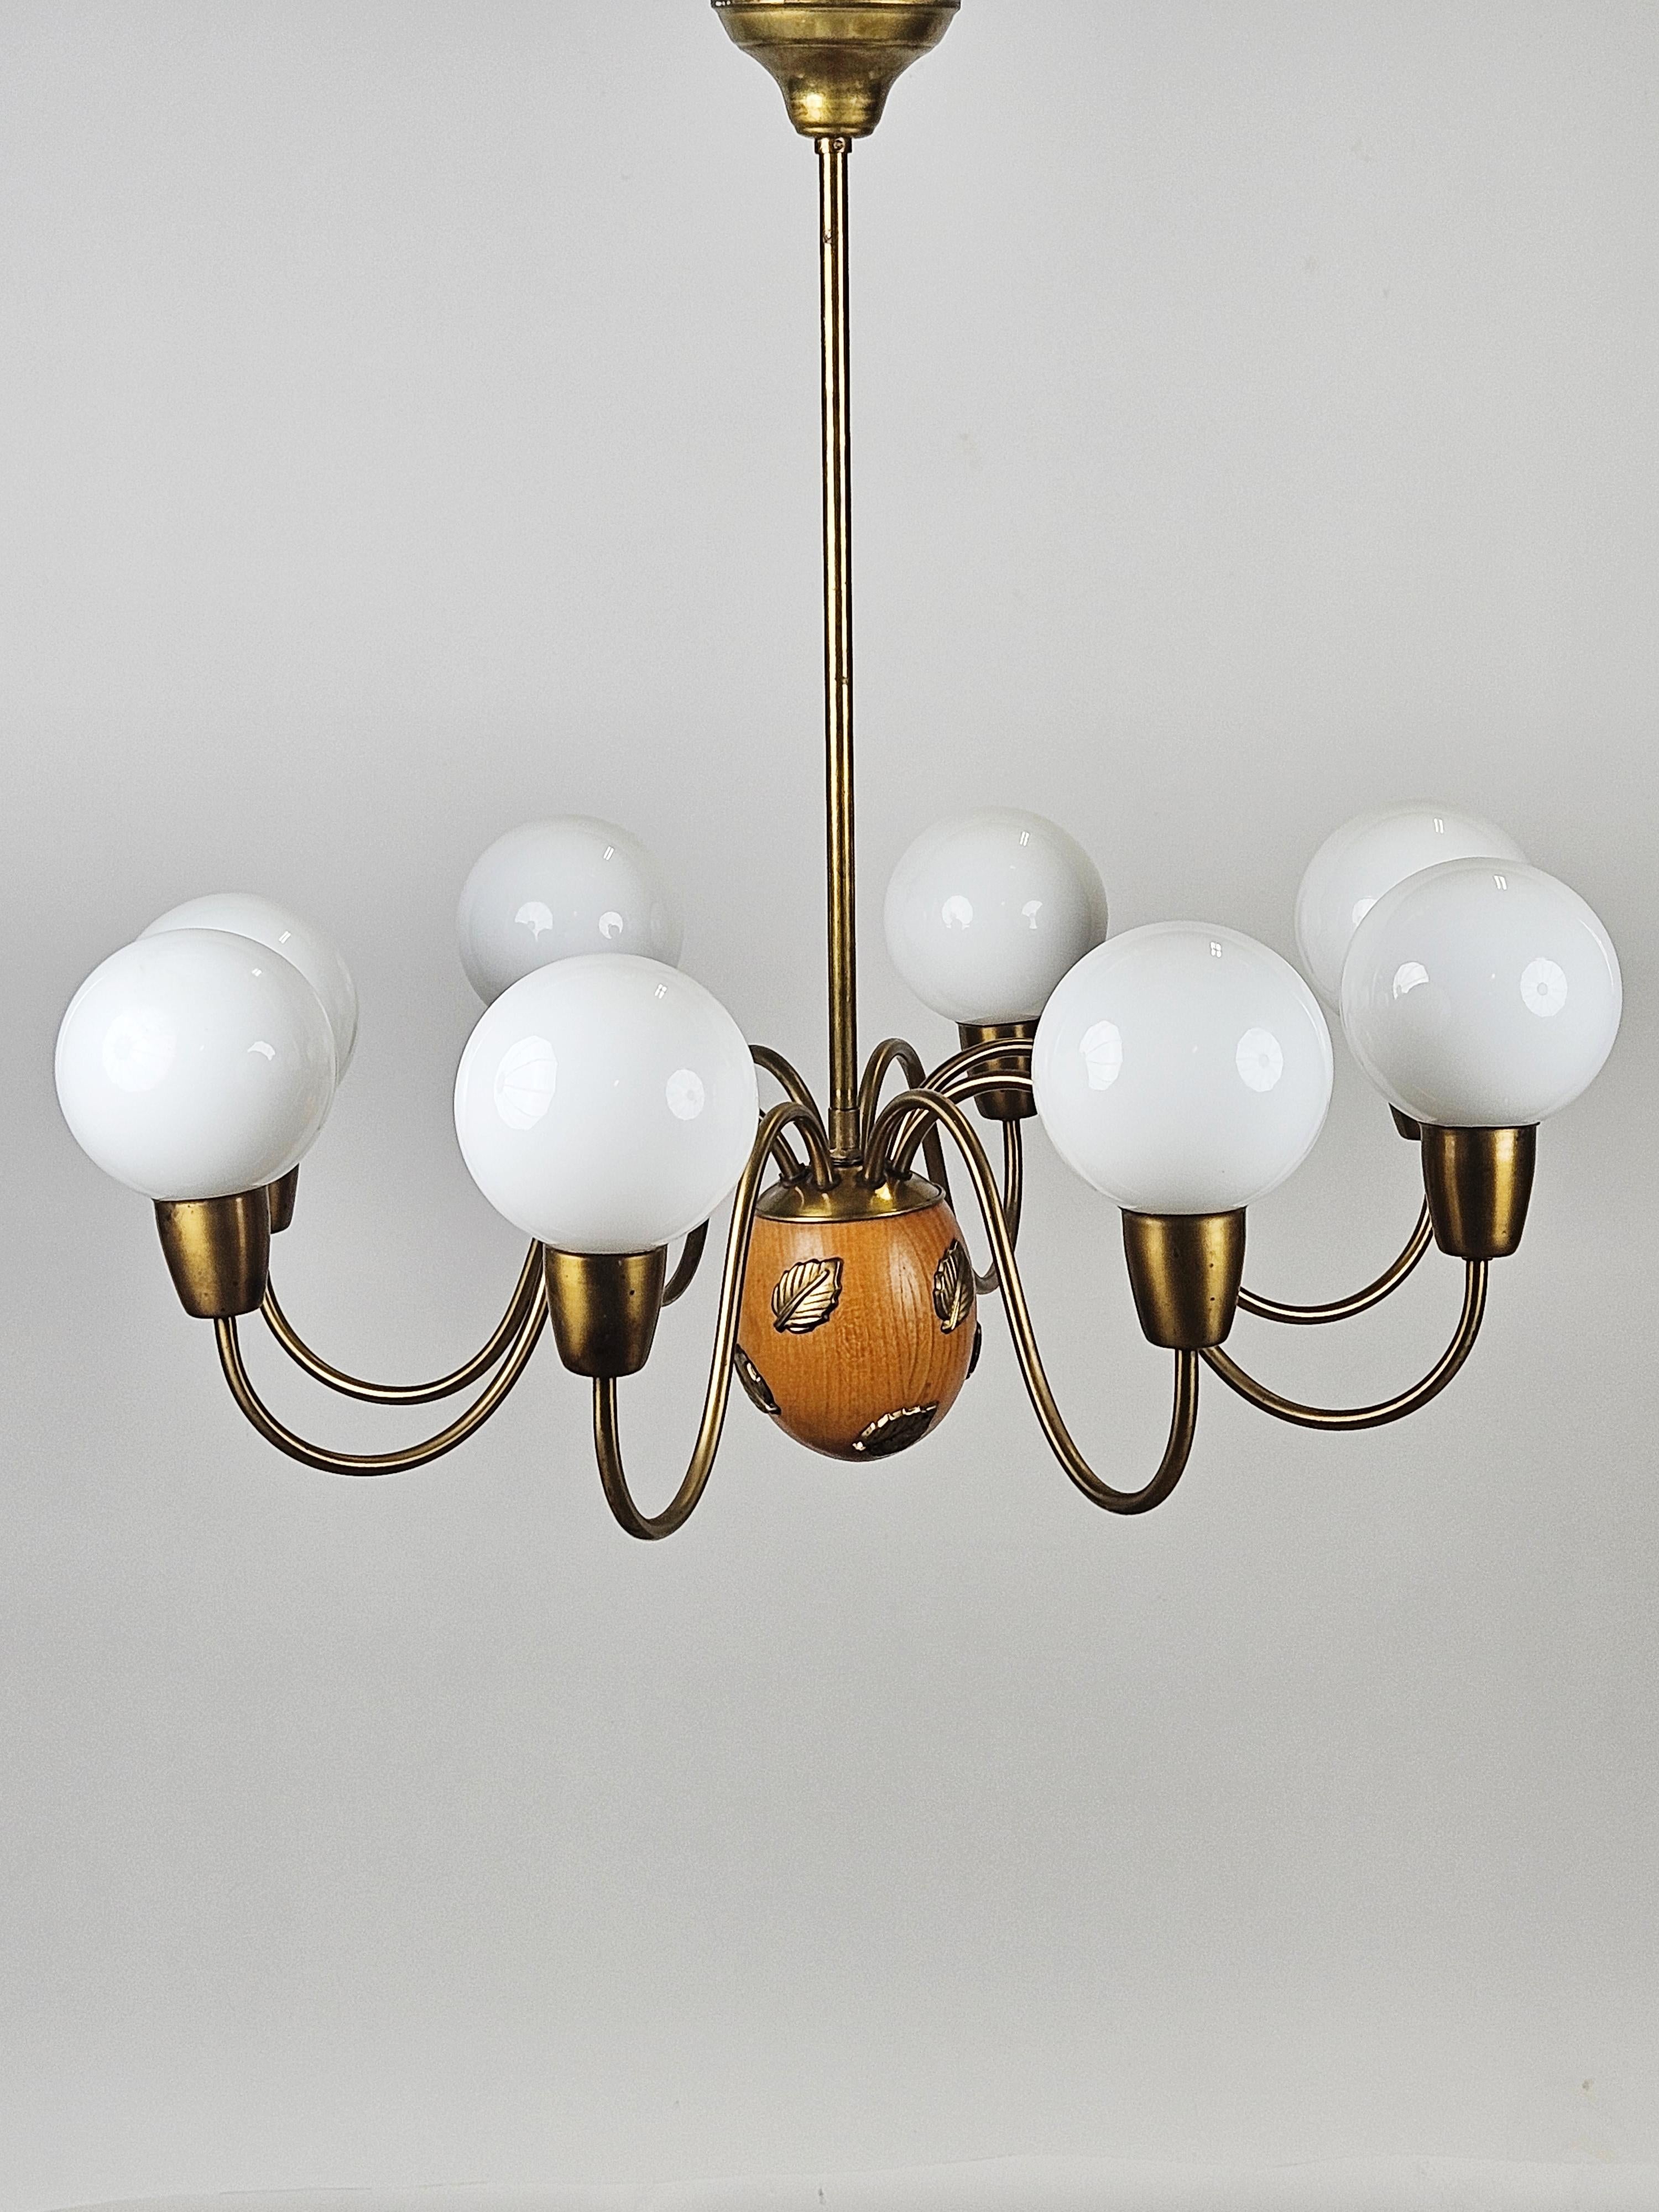 Eight armed chandelier designed by Hans Bergström and produced by his own firm Ateljé Lyktan in the 1940s. 

Elegant design with wood and brass details. Sculptured arms with glass globes. 